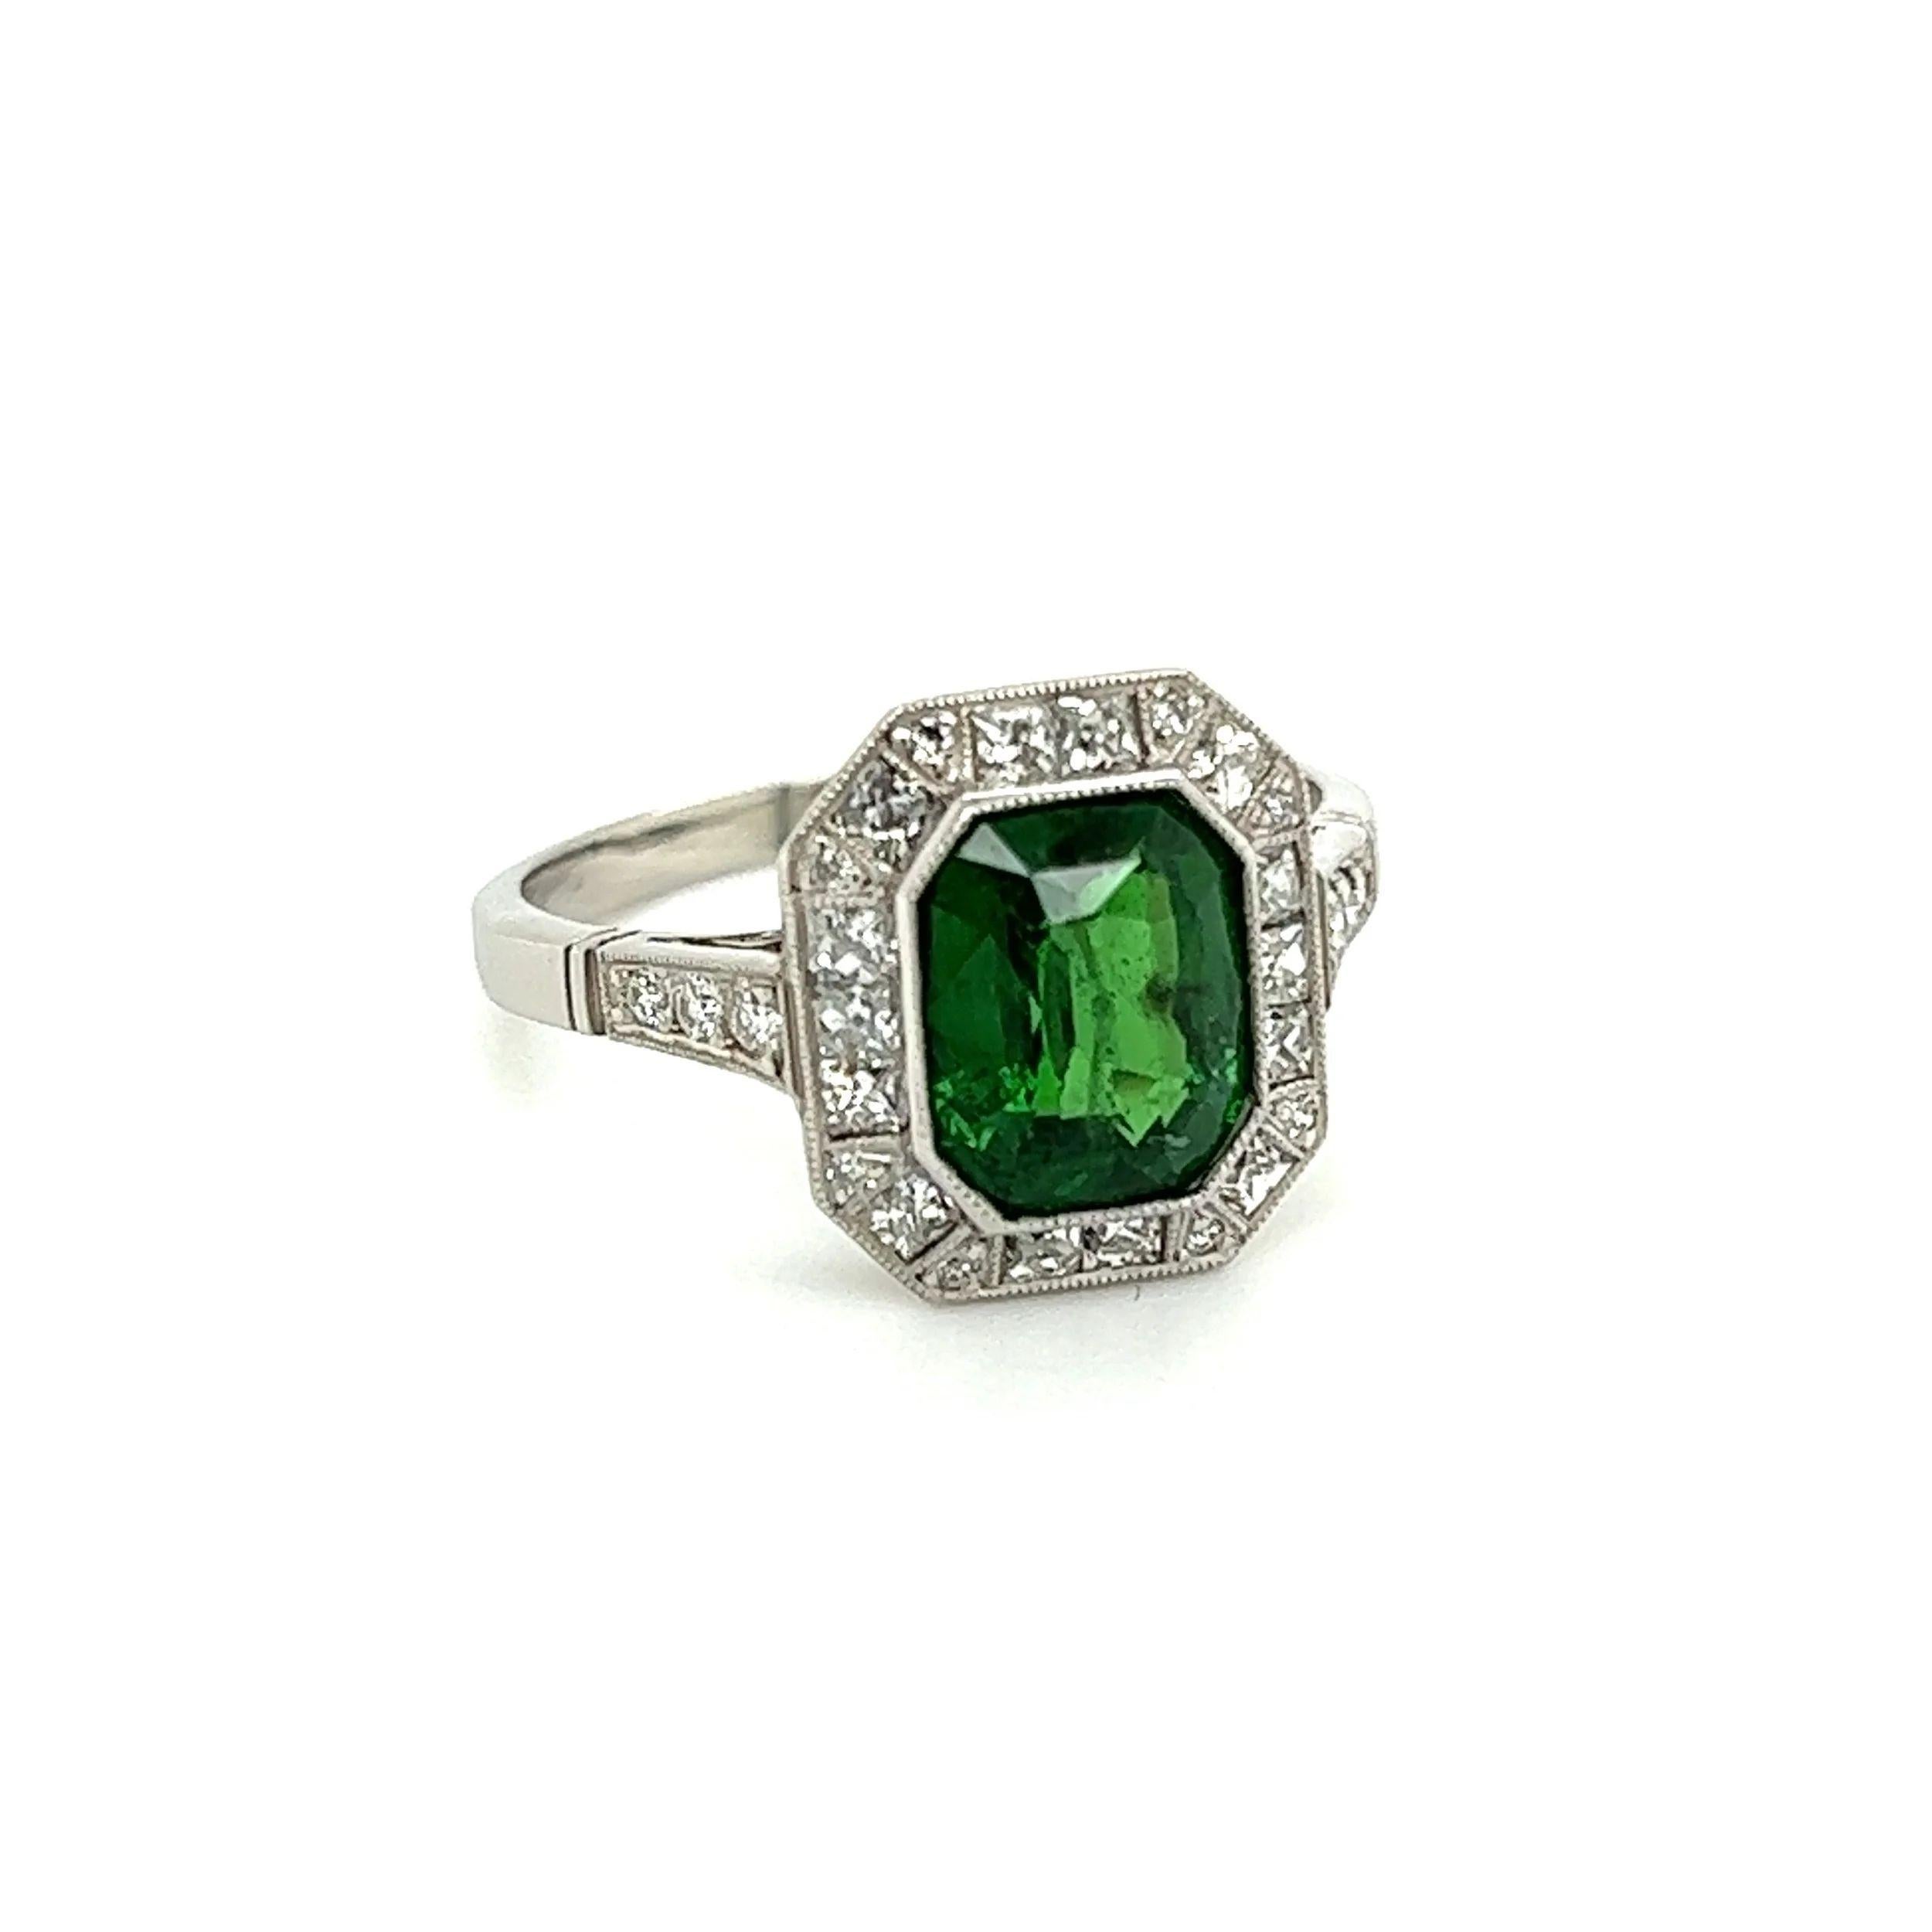 Simply Beautiful! Finely detailed Emerald Cut Tsavorite Garnet and Diamond Platinum Vintage Cocktail Ring. Centering a securely nestled Emerald-Cut Tsavorite Garnet, weighing approx. 2.57 Carats. Surrounded by Diamonds, 0.50tcw French and 0.20tcw